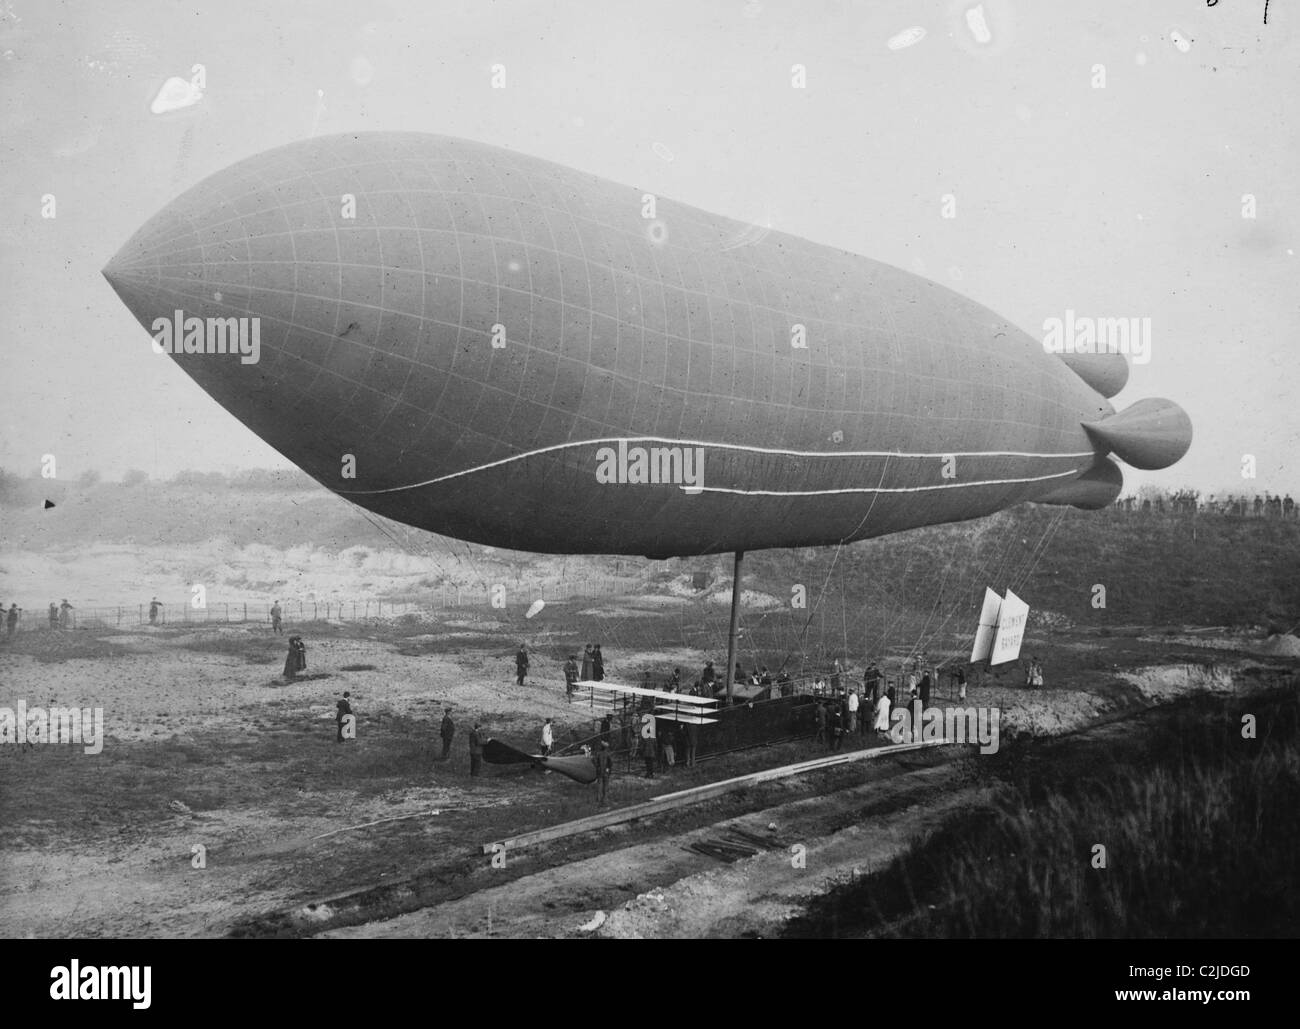 Clement-Bayard Dirigible Ready for Flight to Carry plane aloft Stock Photo